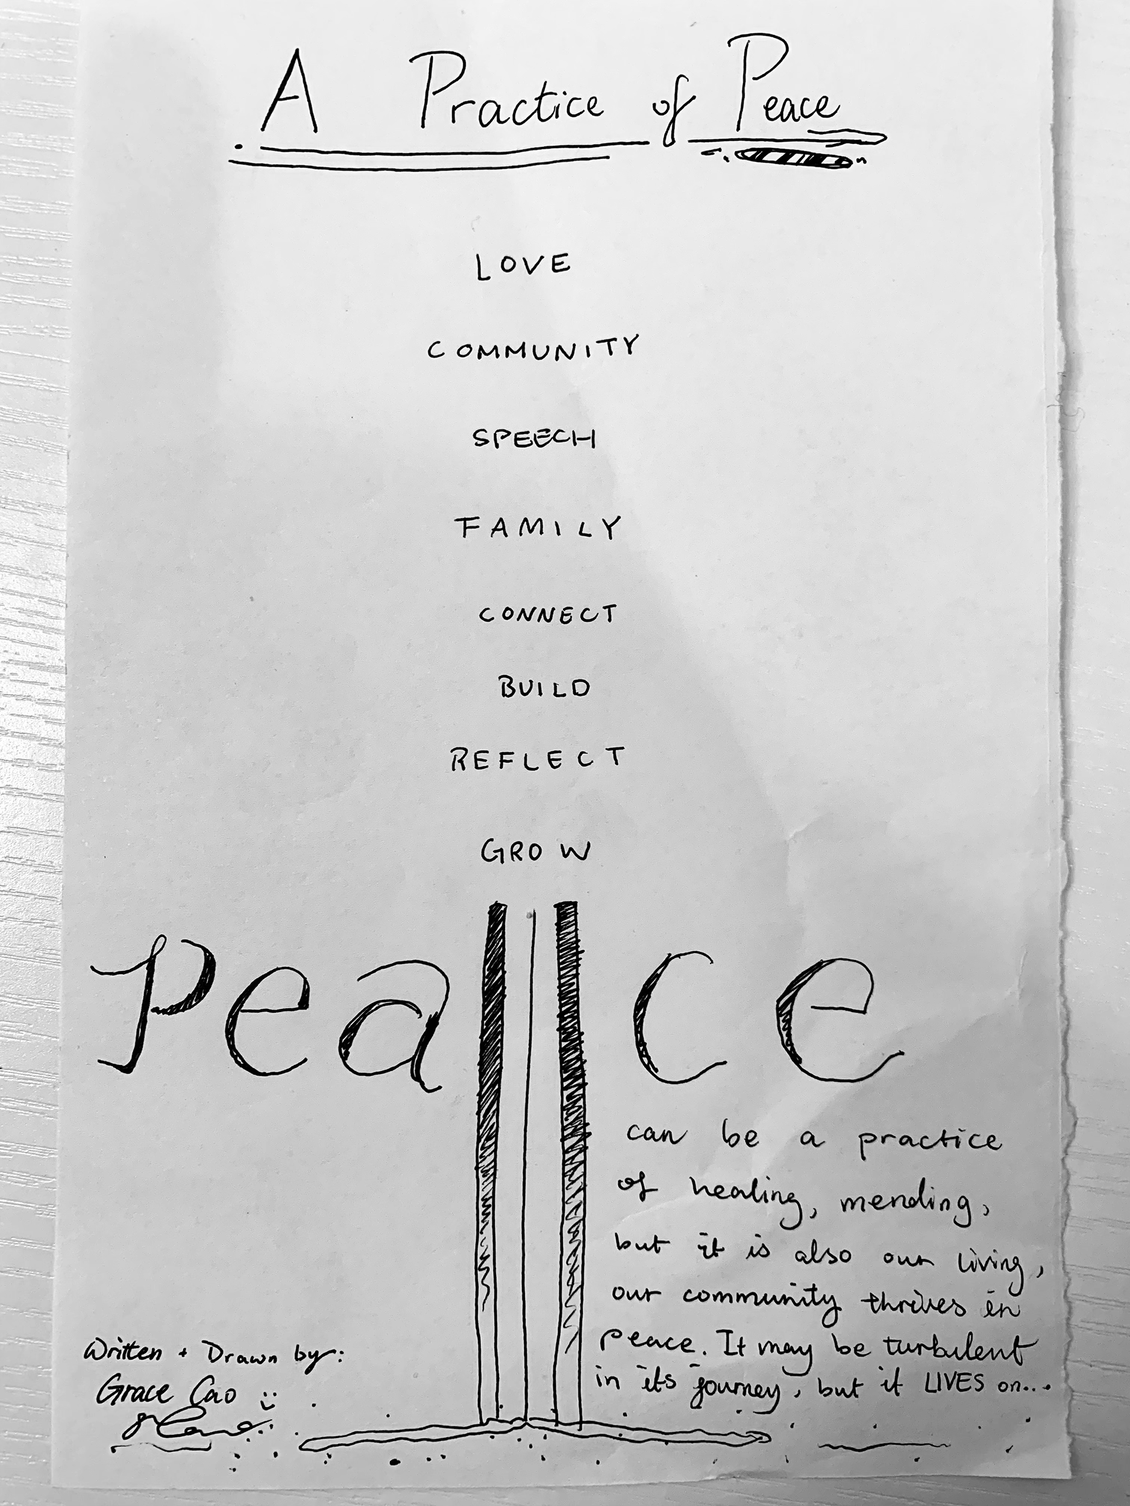 a poem by Grace Cao: Love, Community, Speech, Family, Connect, Build, Reflect, Grow / Peace can be a practice of healing, mending, but it is also our living, our community thrives in peace. It may be turbulent in its journey, but it LIVES on...